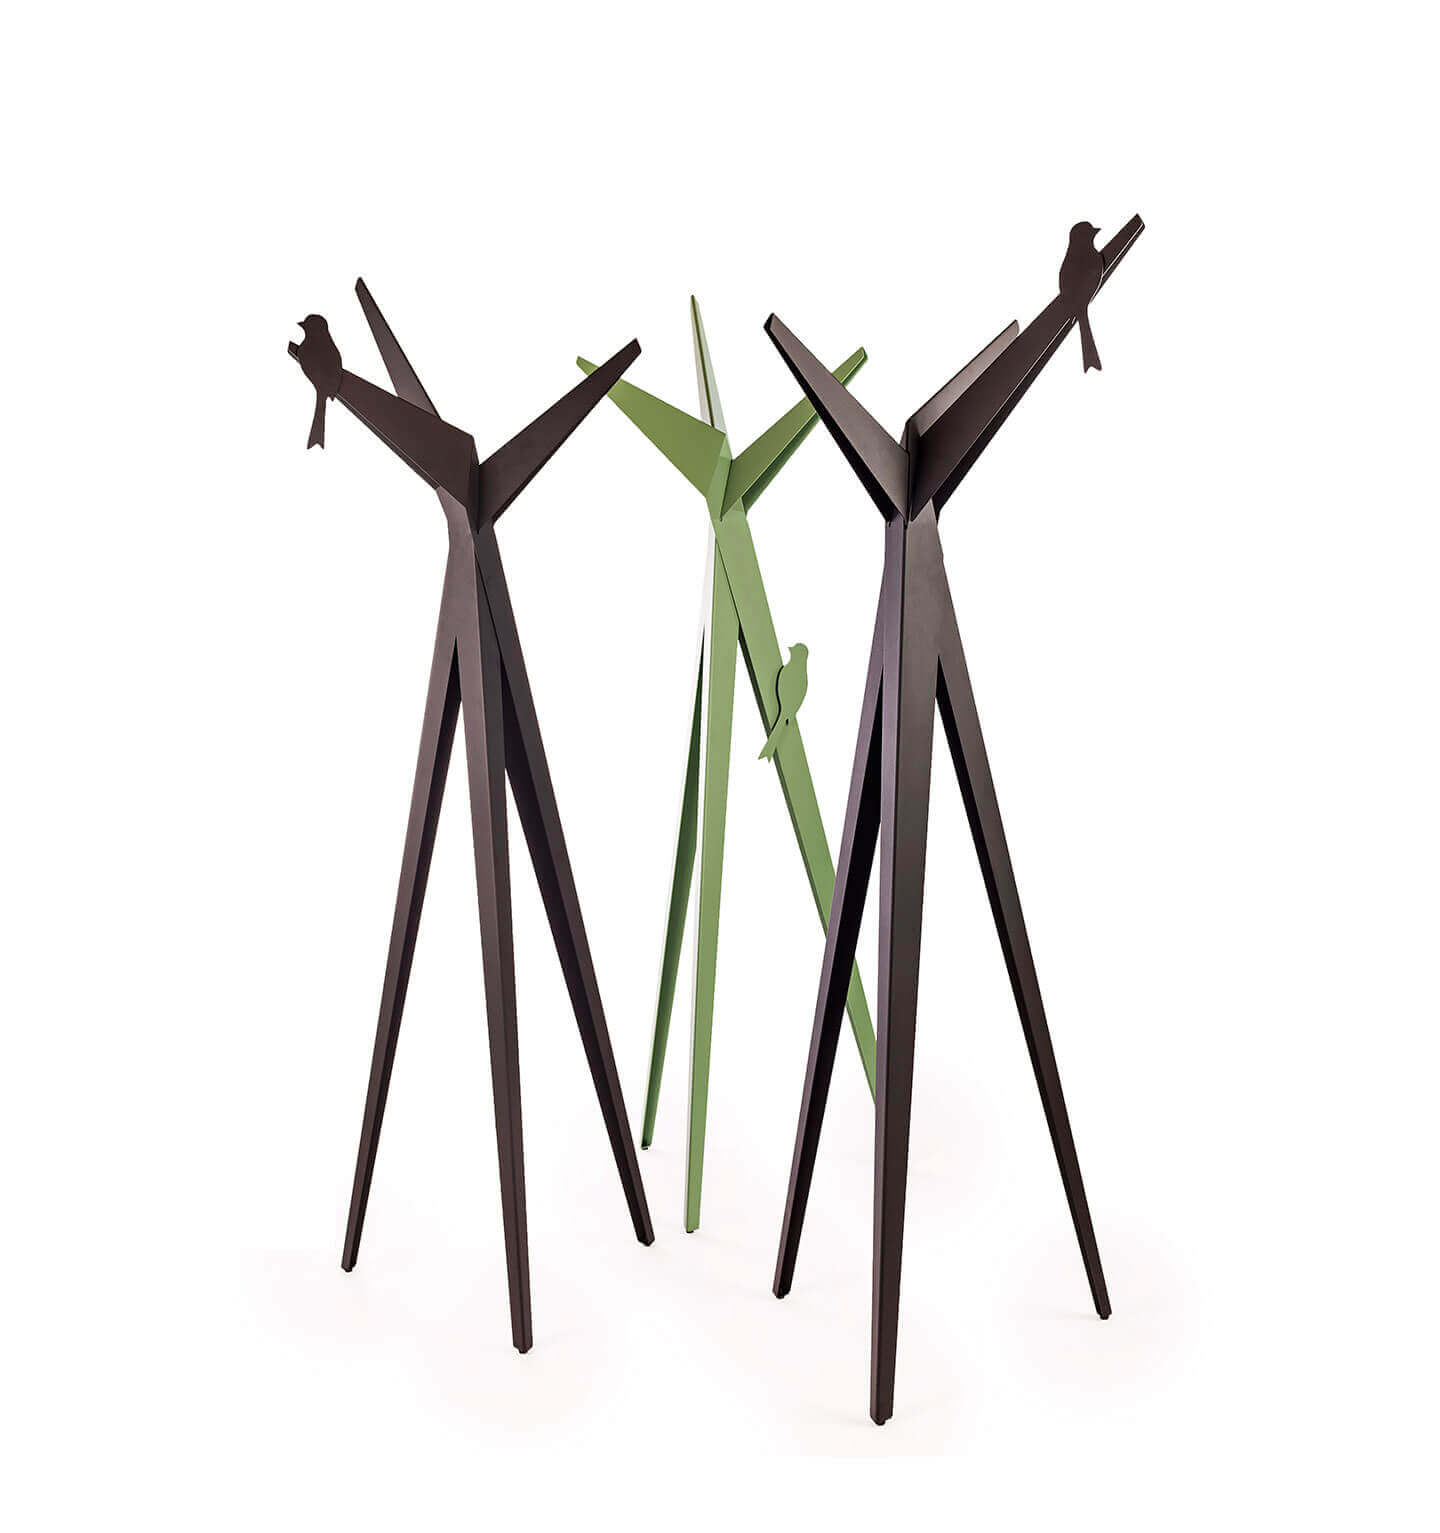 Coat racks in the for of a tree. Biophilic design